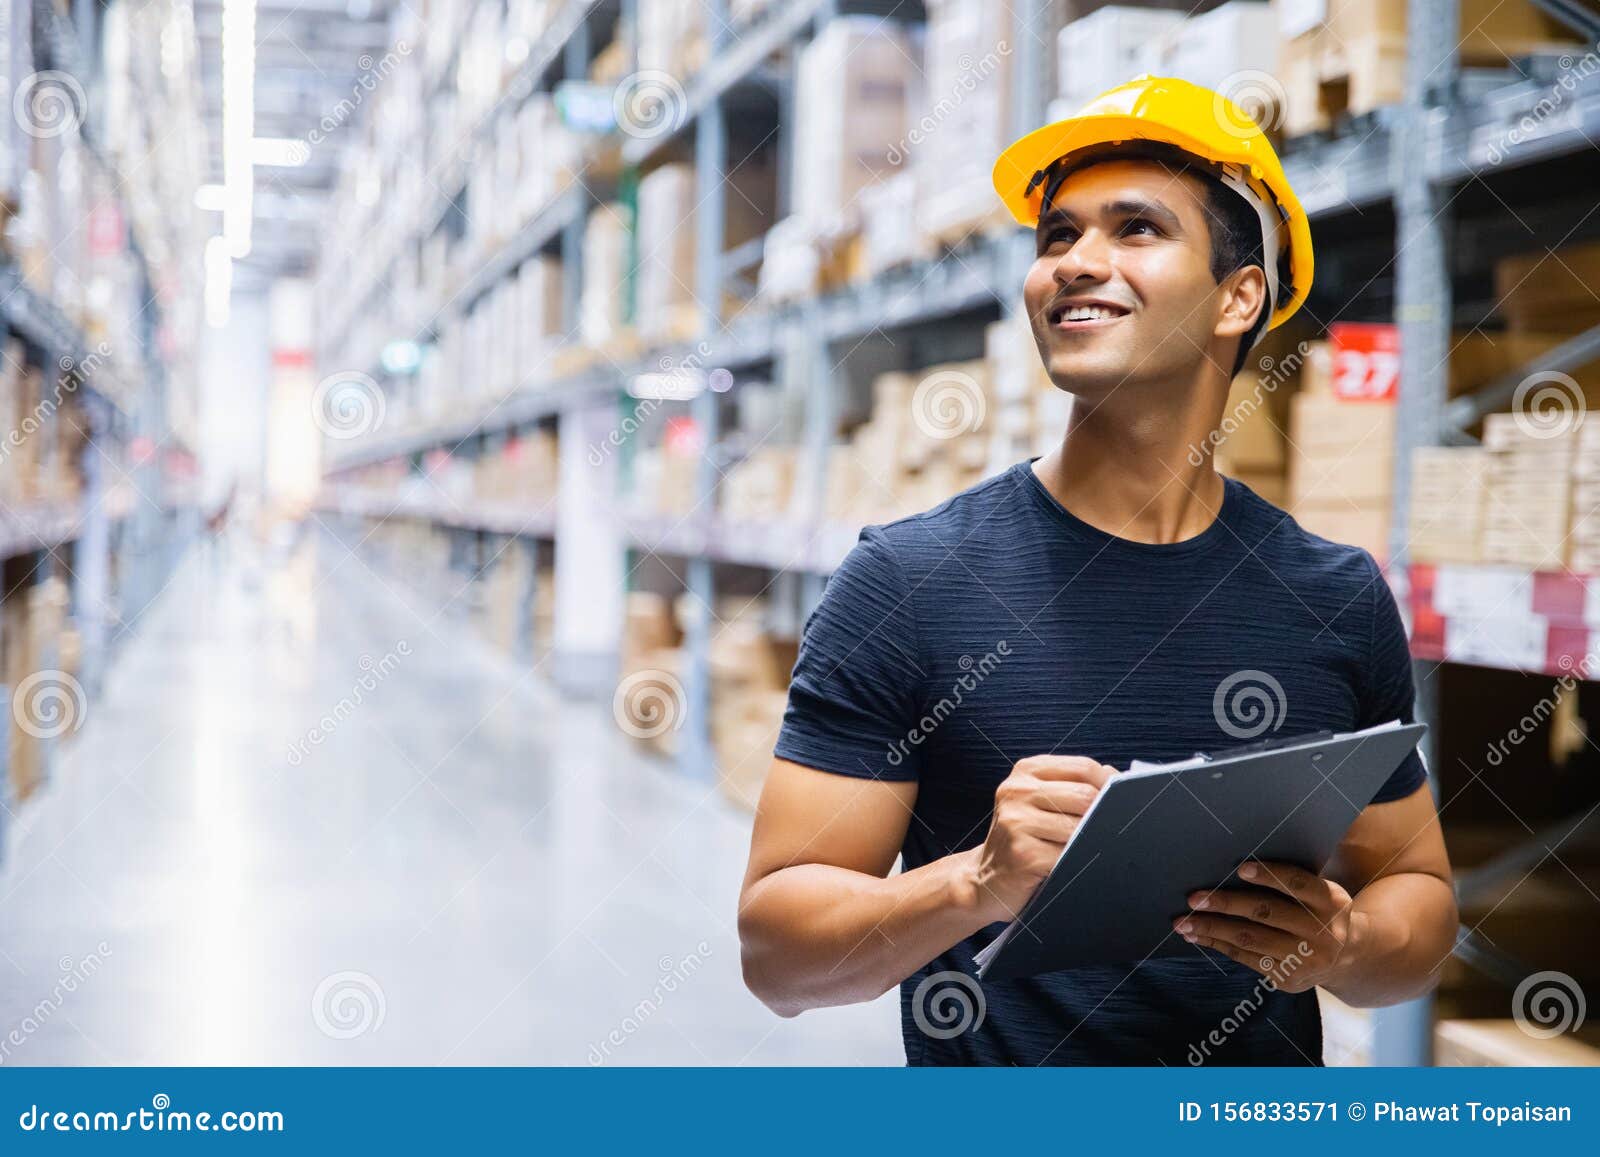 smart indian engineer man worker wearing safety helmet doing stocktaking of product management in cardboard box on shelves